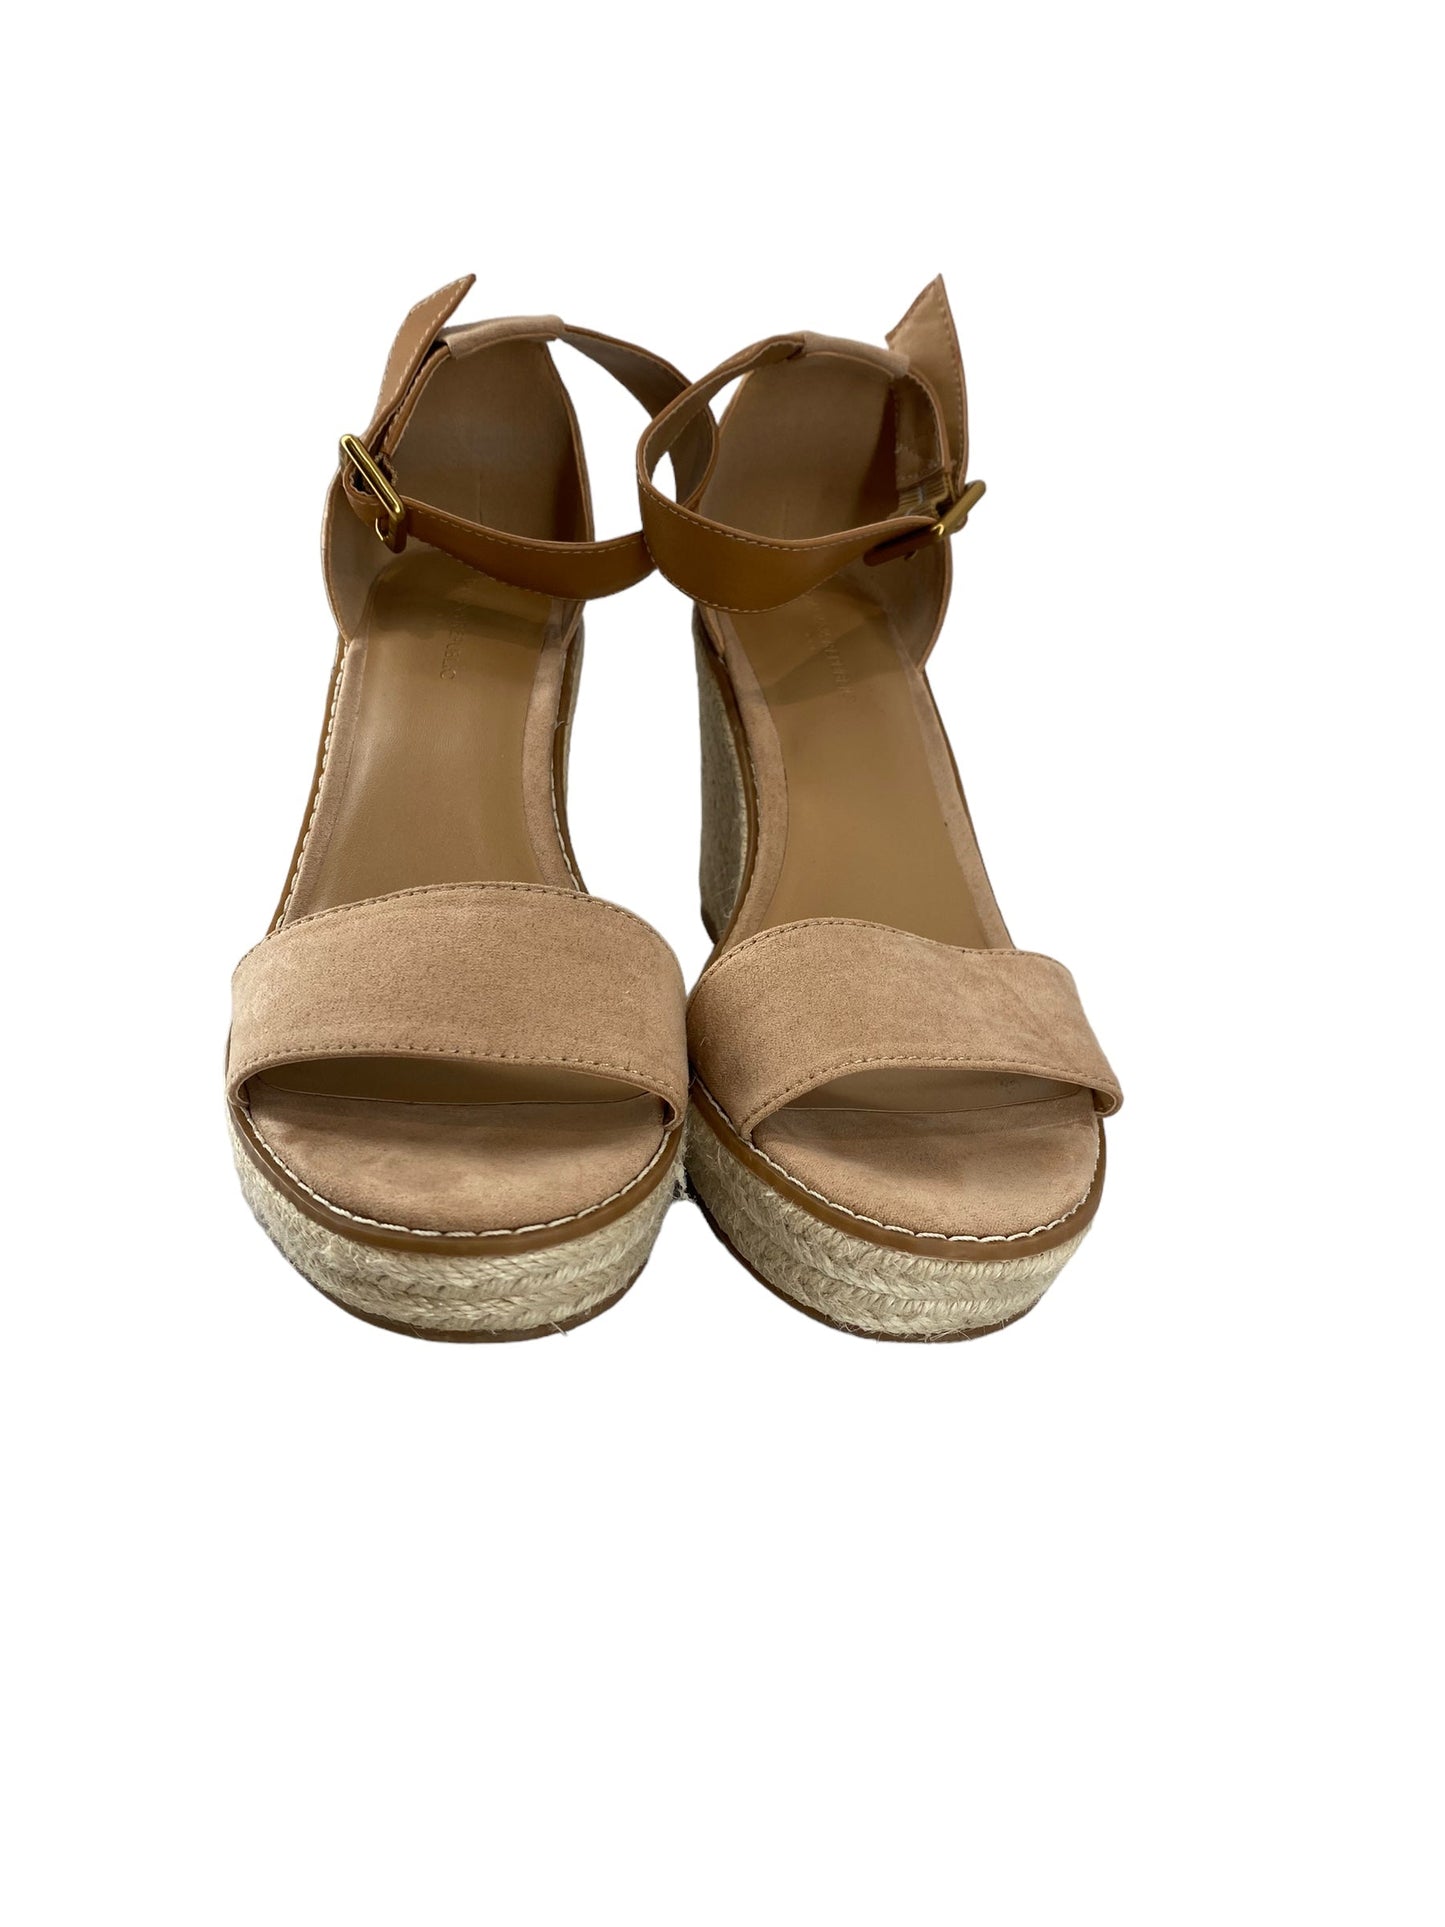 Sandals Heels Wedge By Banana Republic  Size: 8.5